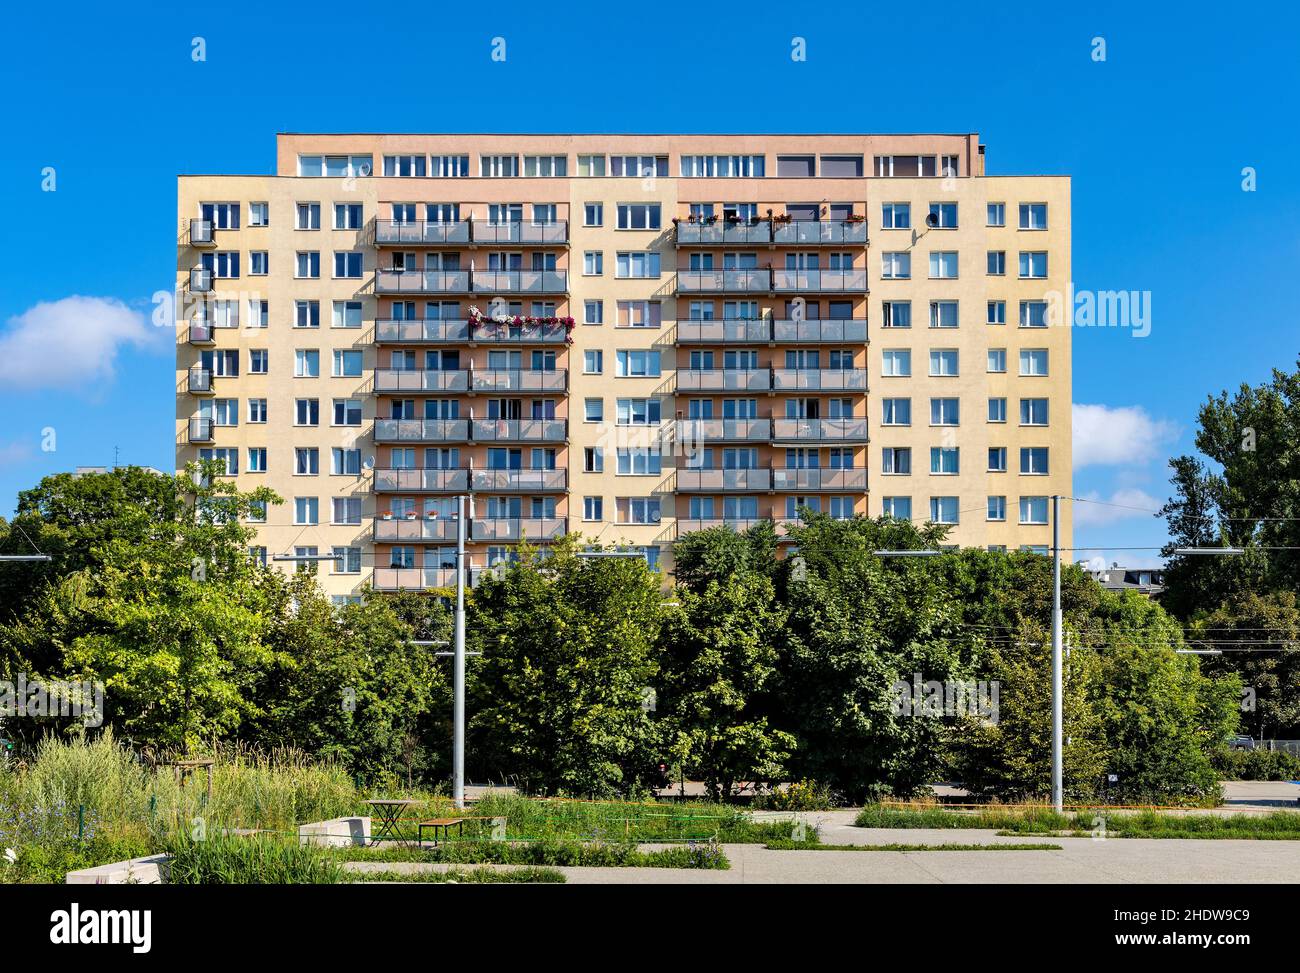 Warsaw, Poland - July 11, 2021: Large scale multi family project residential building at Melsztynska street in Mokotow district of Warsaw Stock Photo